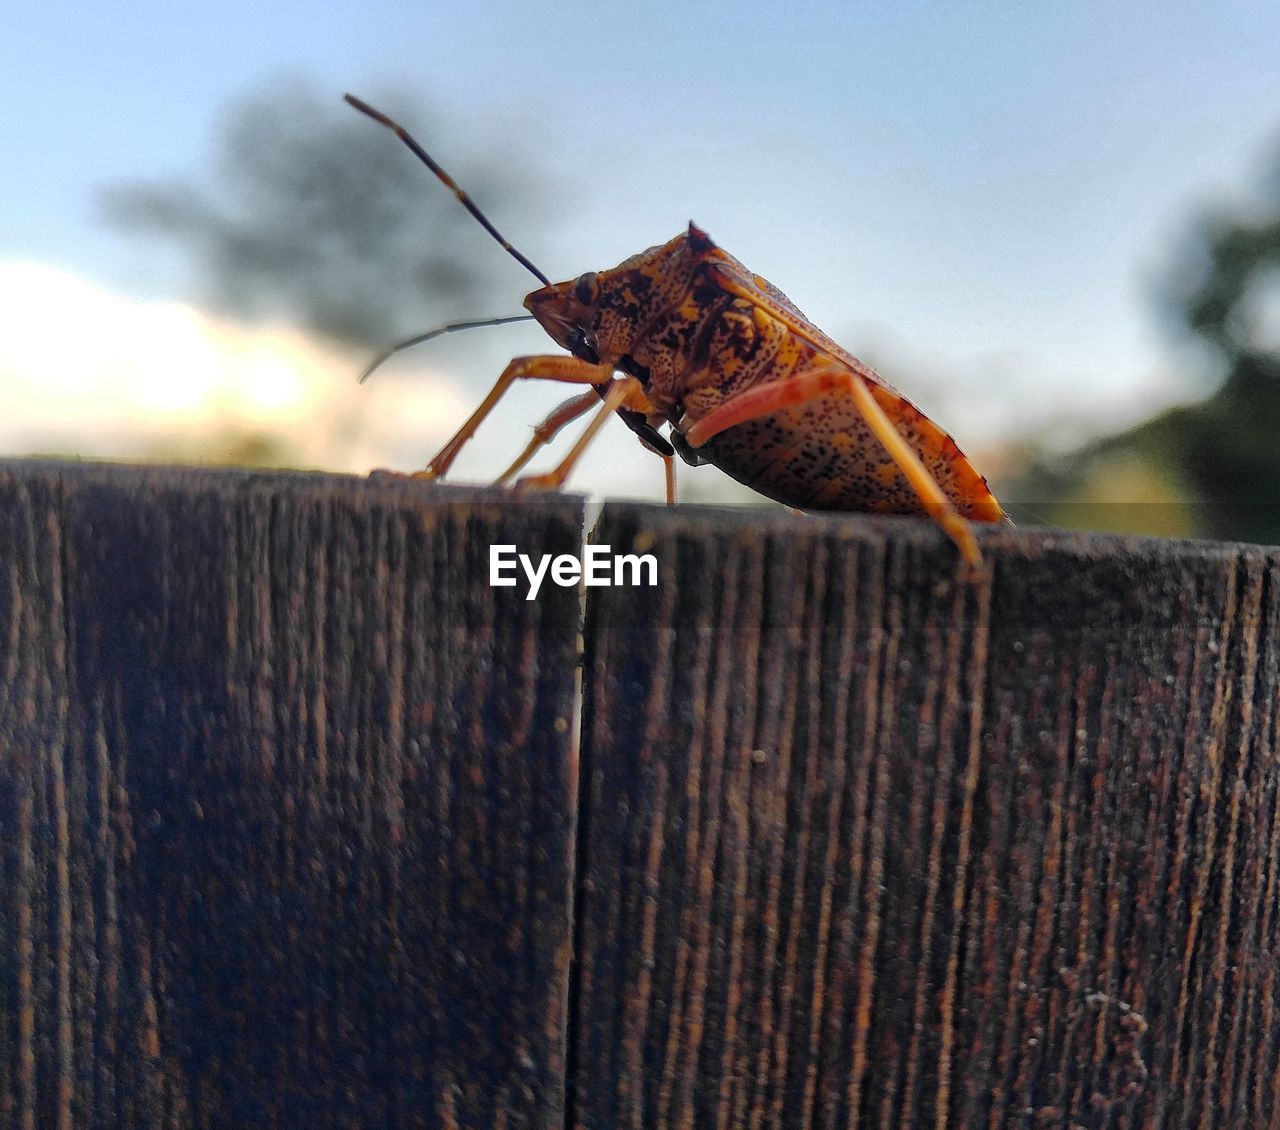 Close-up of insect on wood against sky